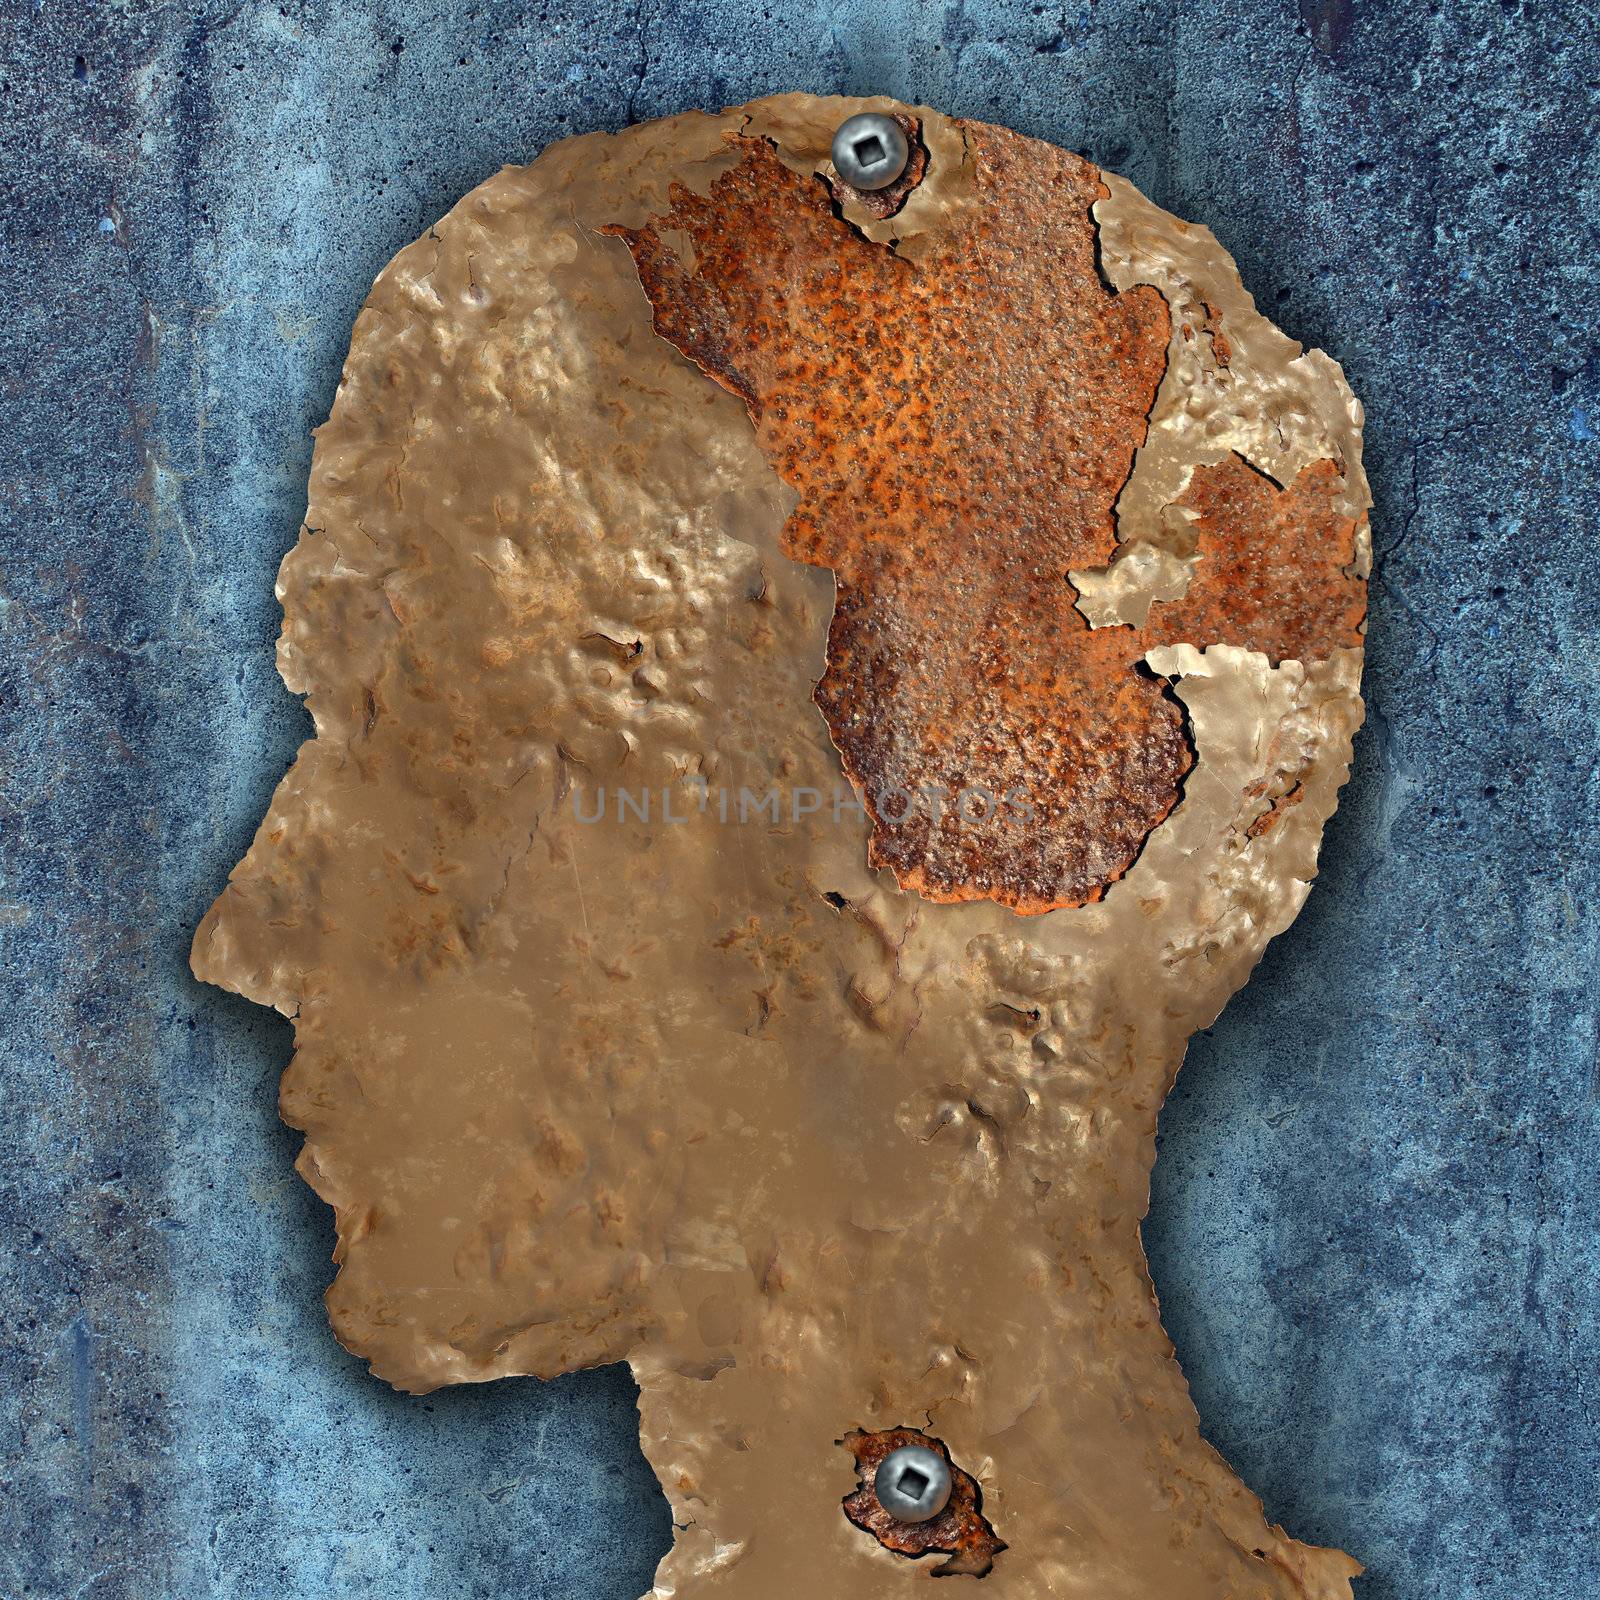 Dementia and aging as memory loss concept for brain cancer decay or an Alzheimer's disease with the medical icon of an old rusting piece of painted metal in the shape of a human head with rust as losing mind function.